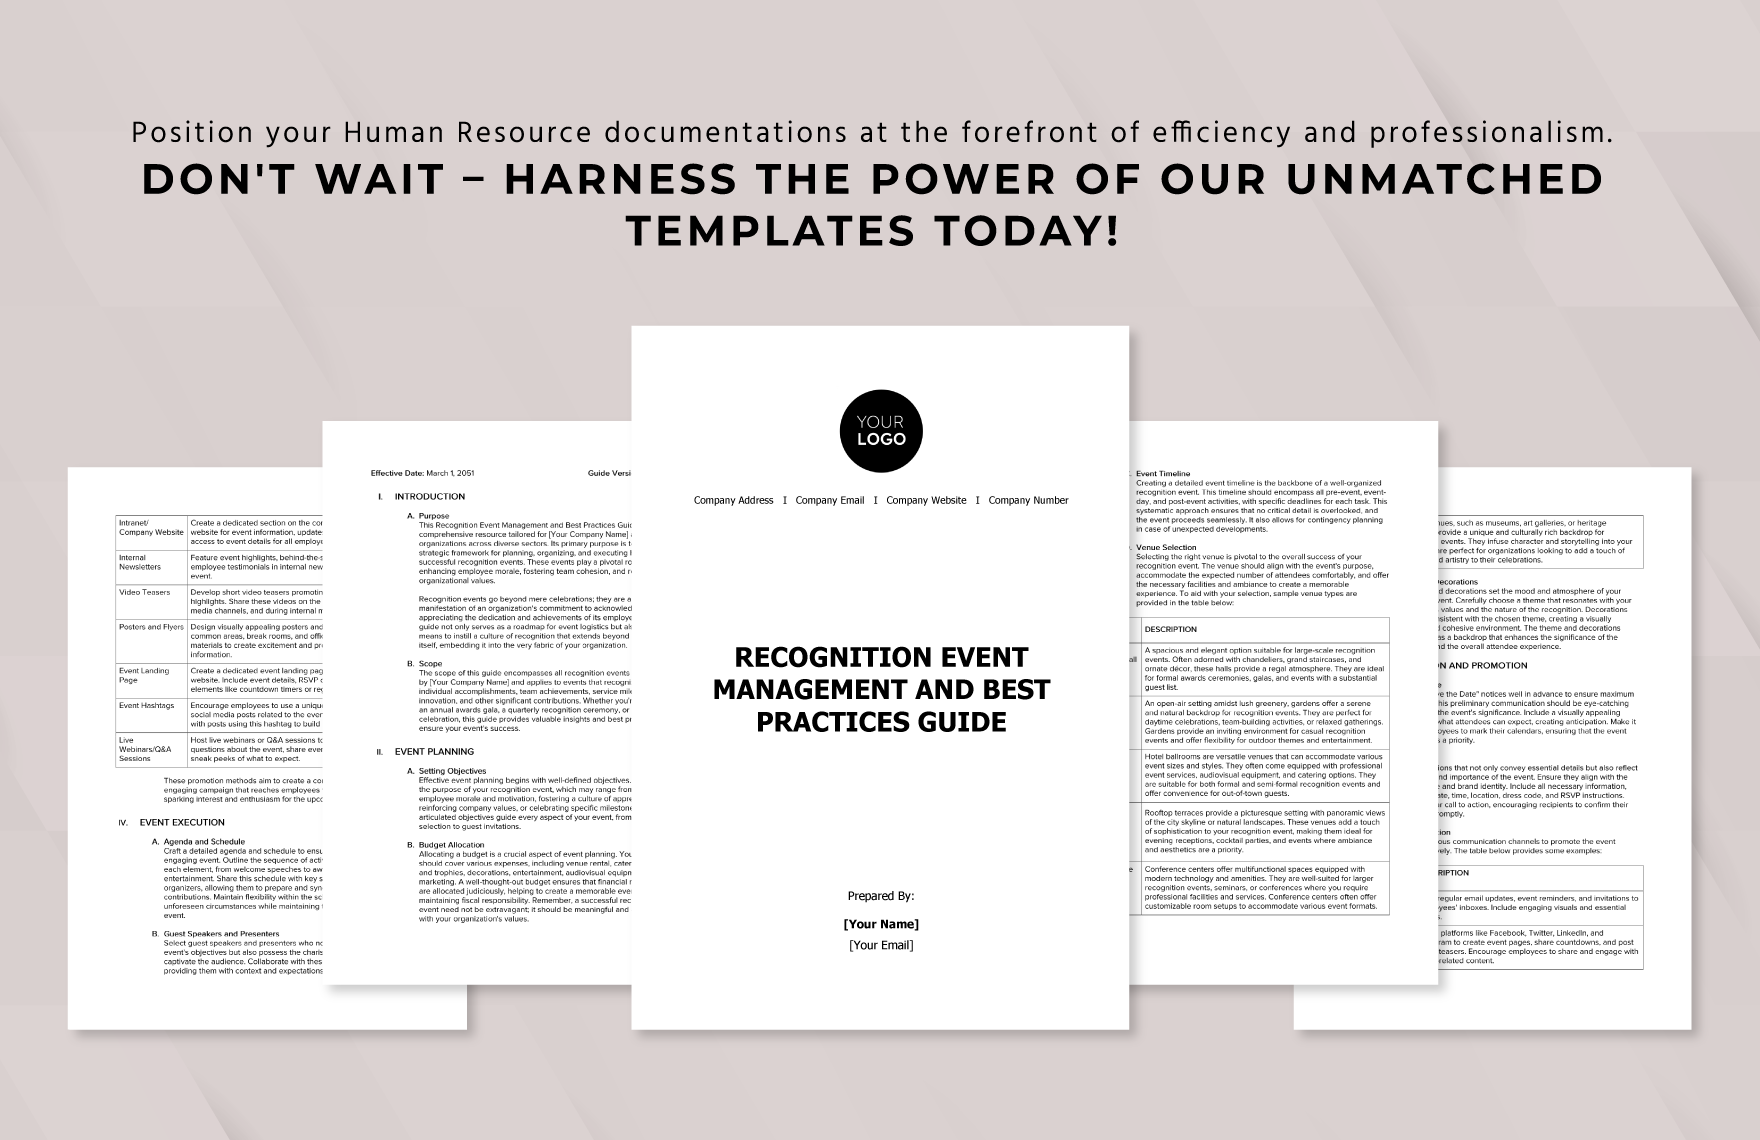 Recognition Event Management and Best Practices Guide HR Template